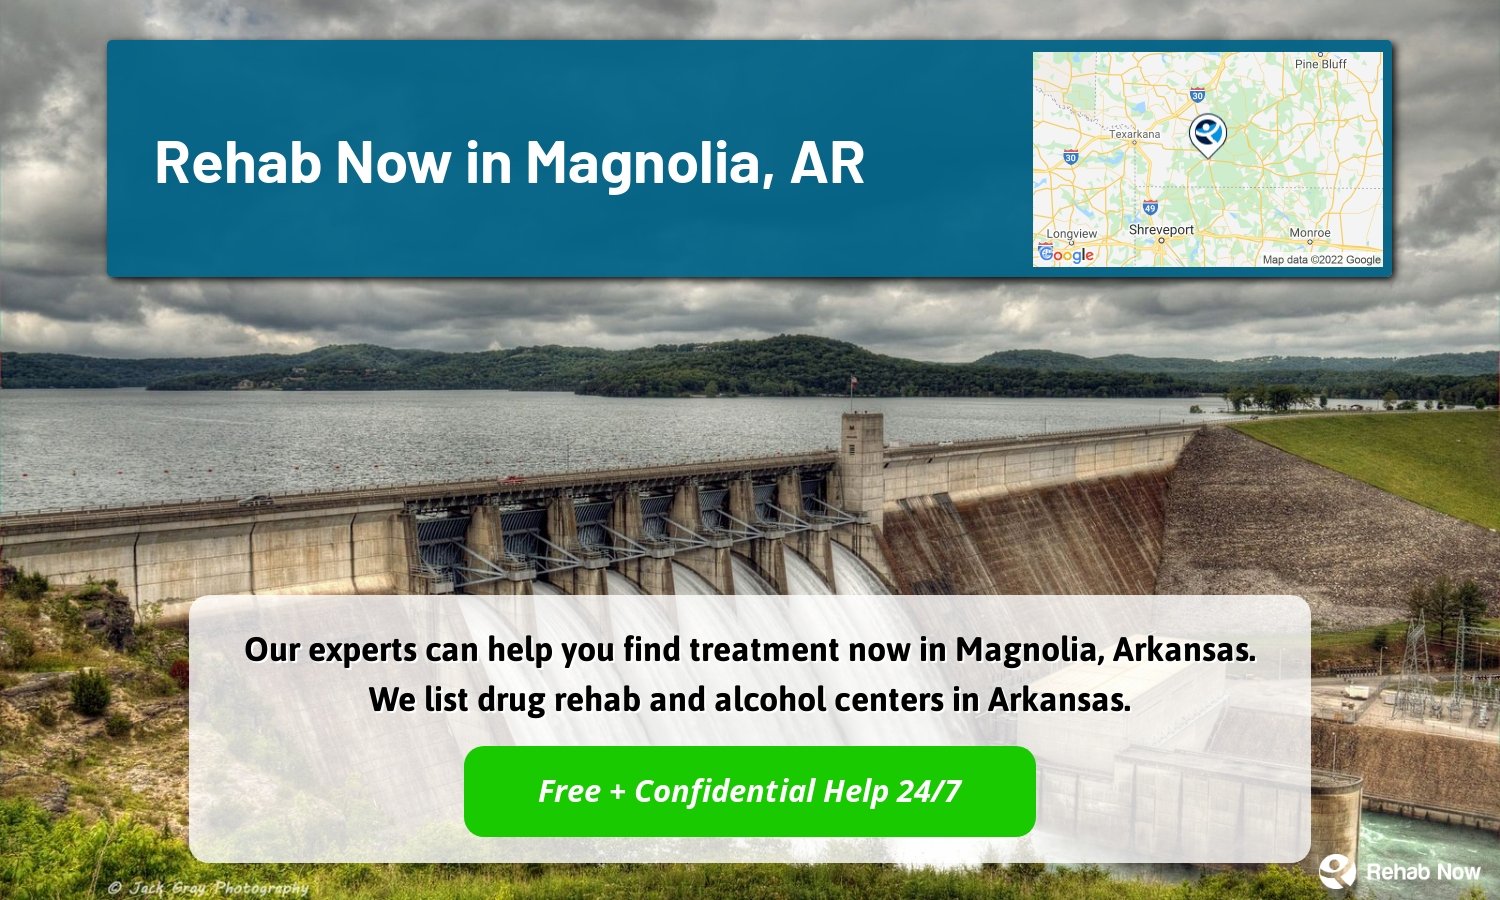 Our experts can help you find treatment now in Magnolia, Arkansas. We list drug rehab and alcohol centers in Arkansas.